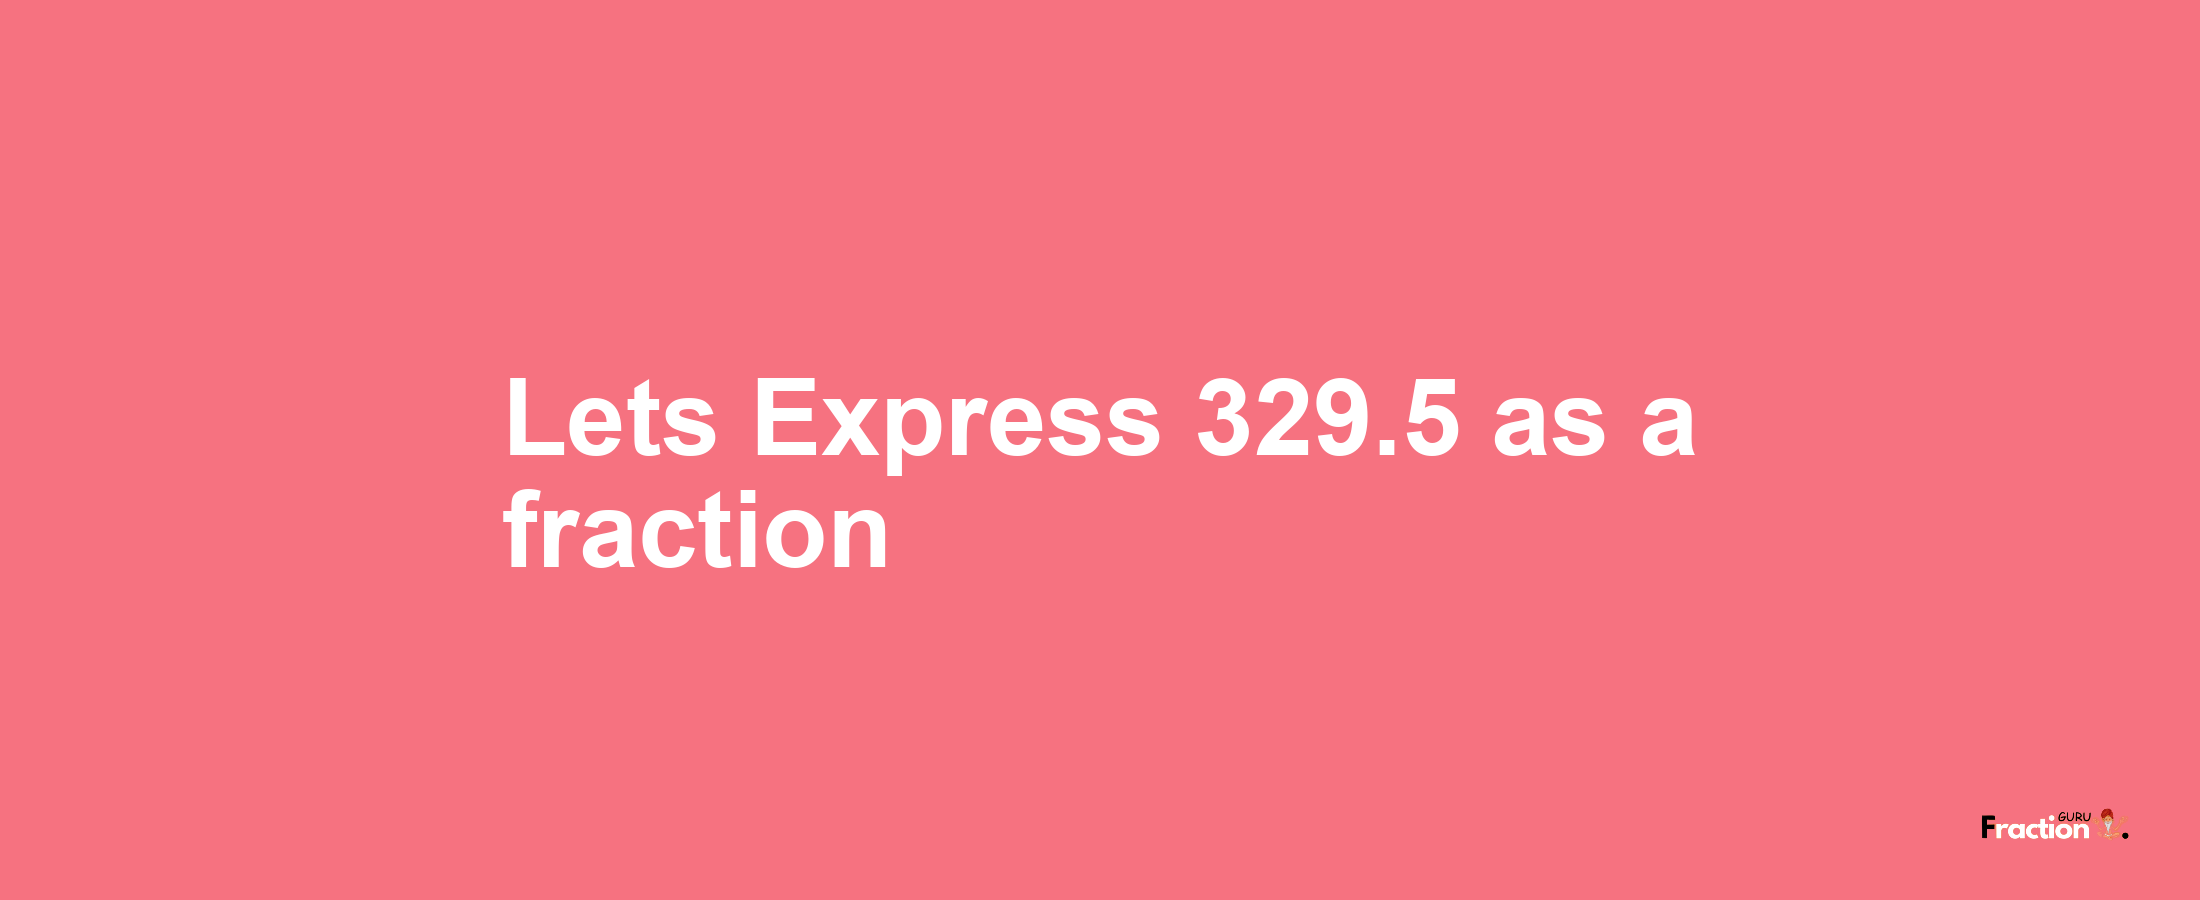 Lets Express 329.5 as afraction